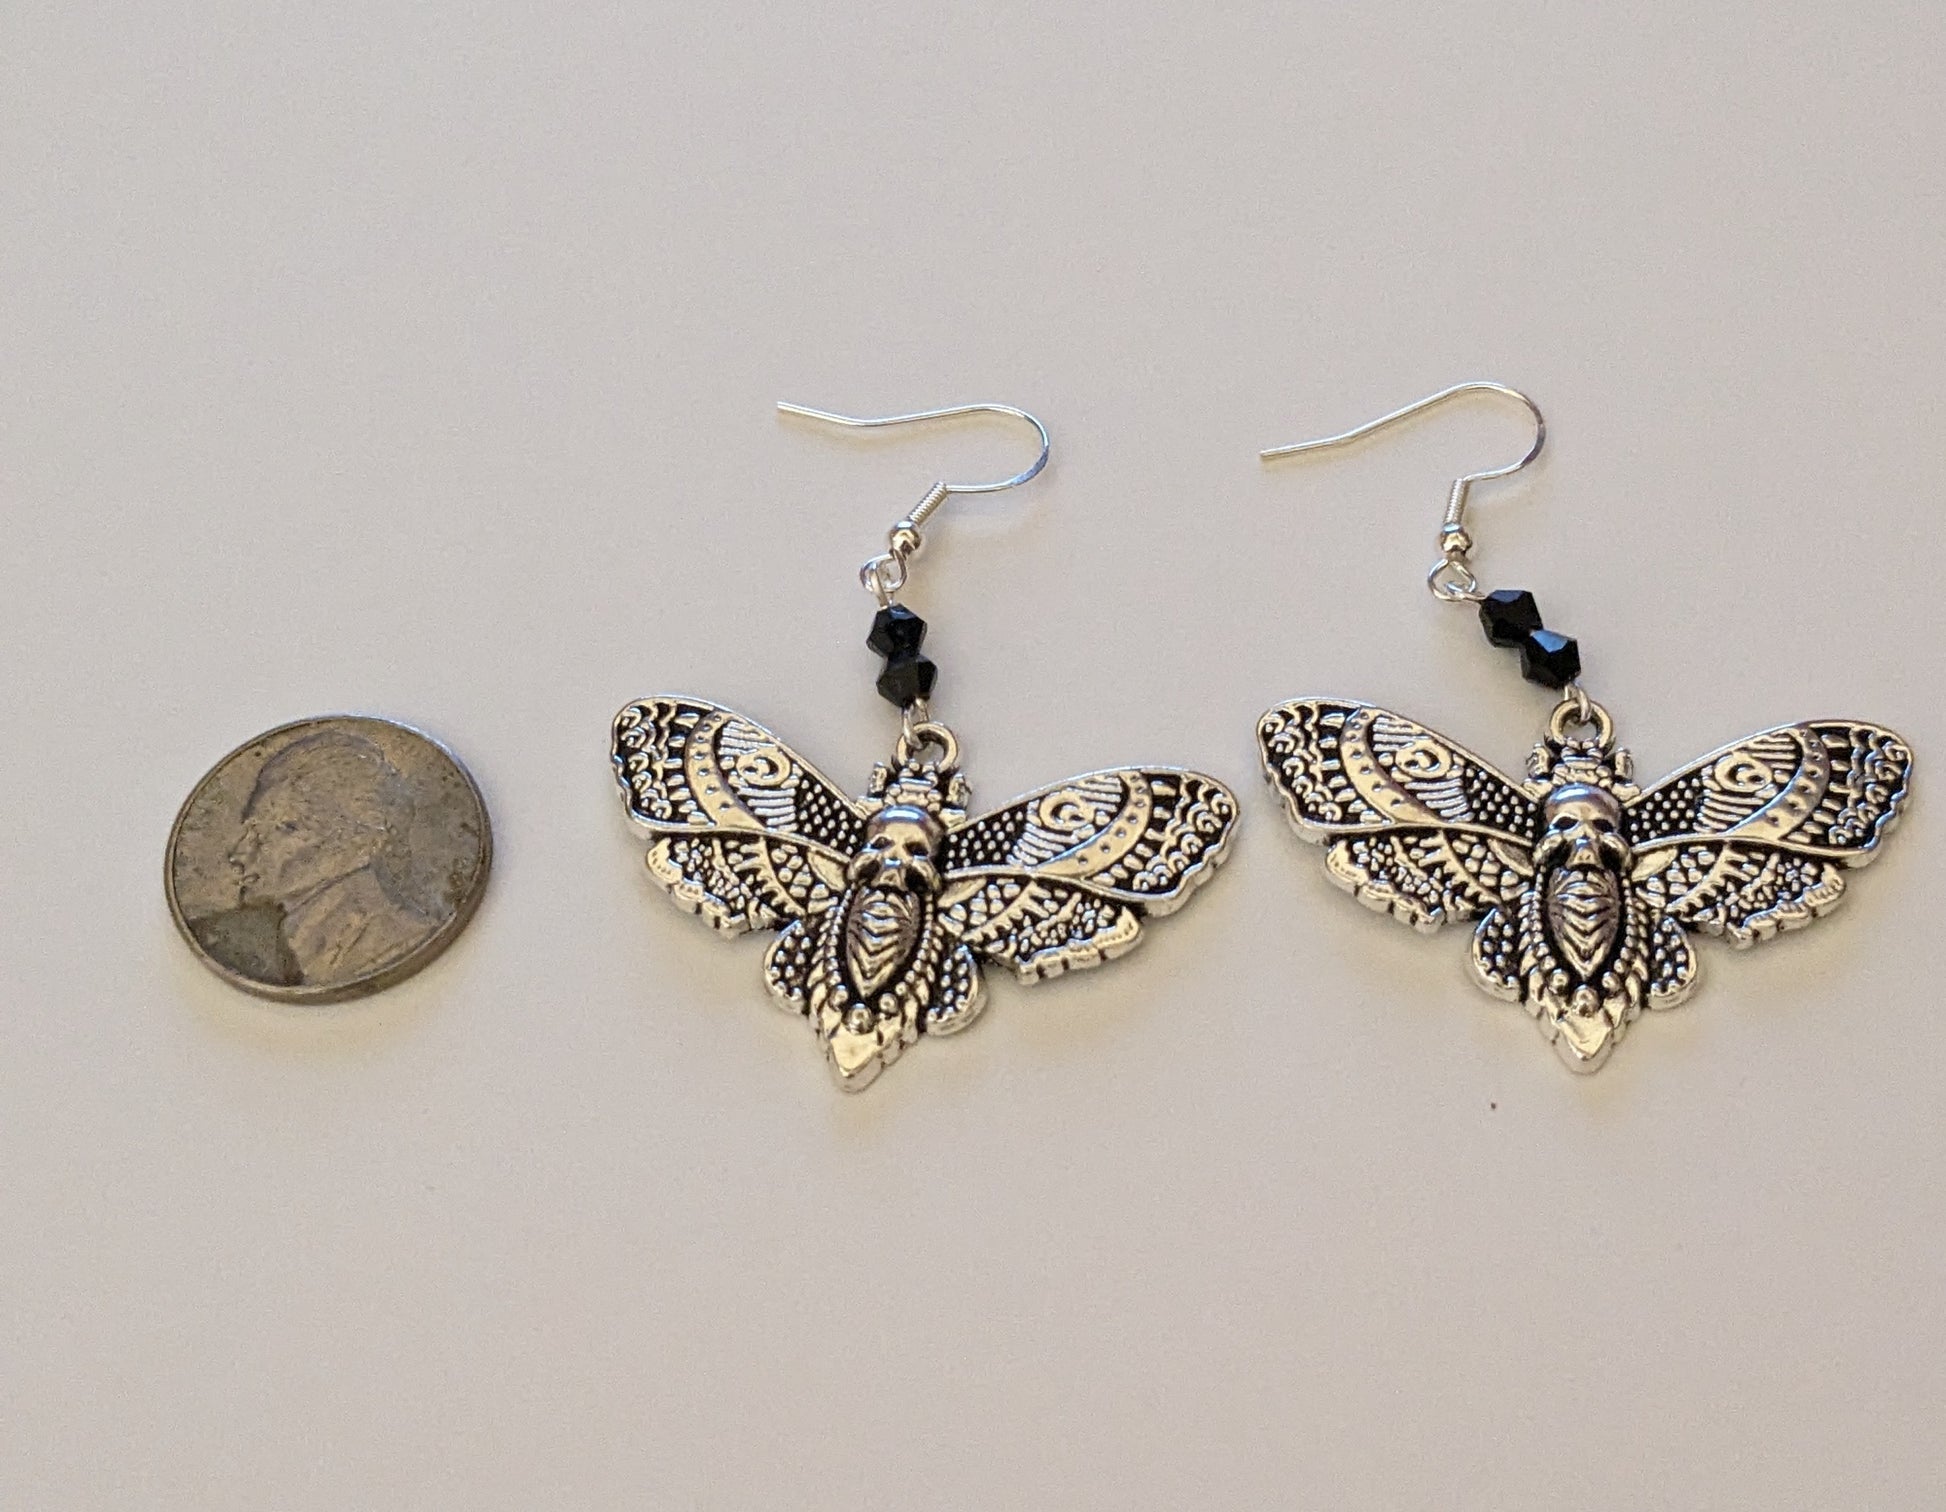 Earrings next to a nickel to show scale 